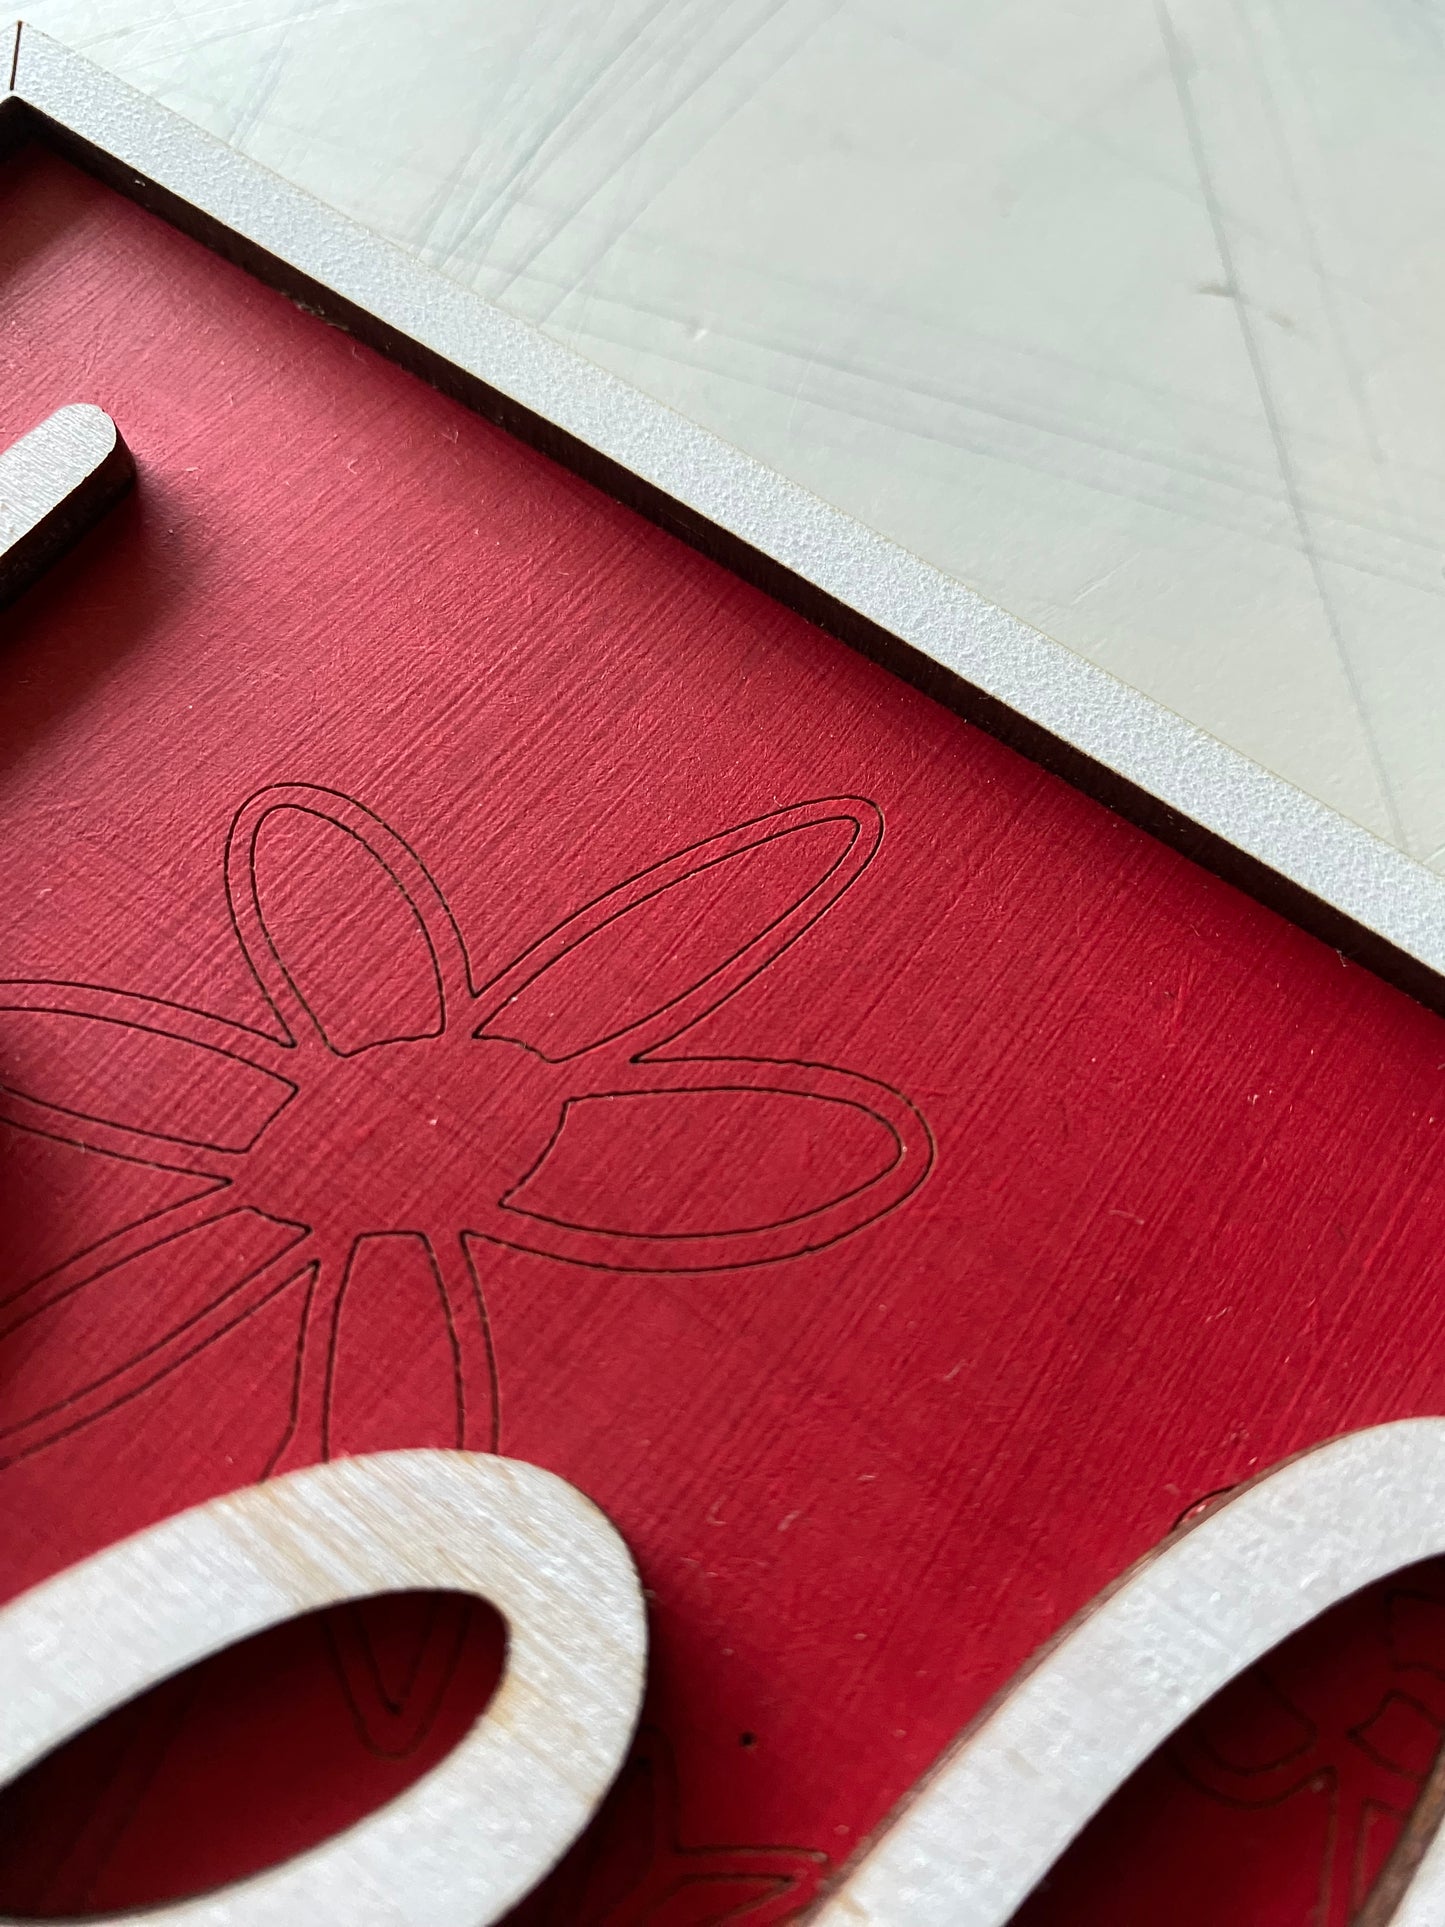 beloved - red and white 3d sign with hand drawn wildflower engraving